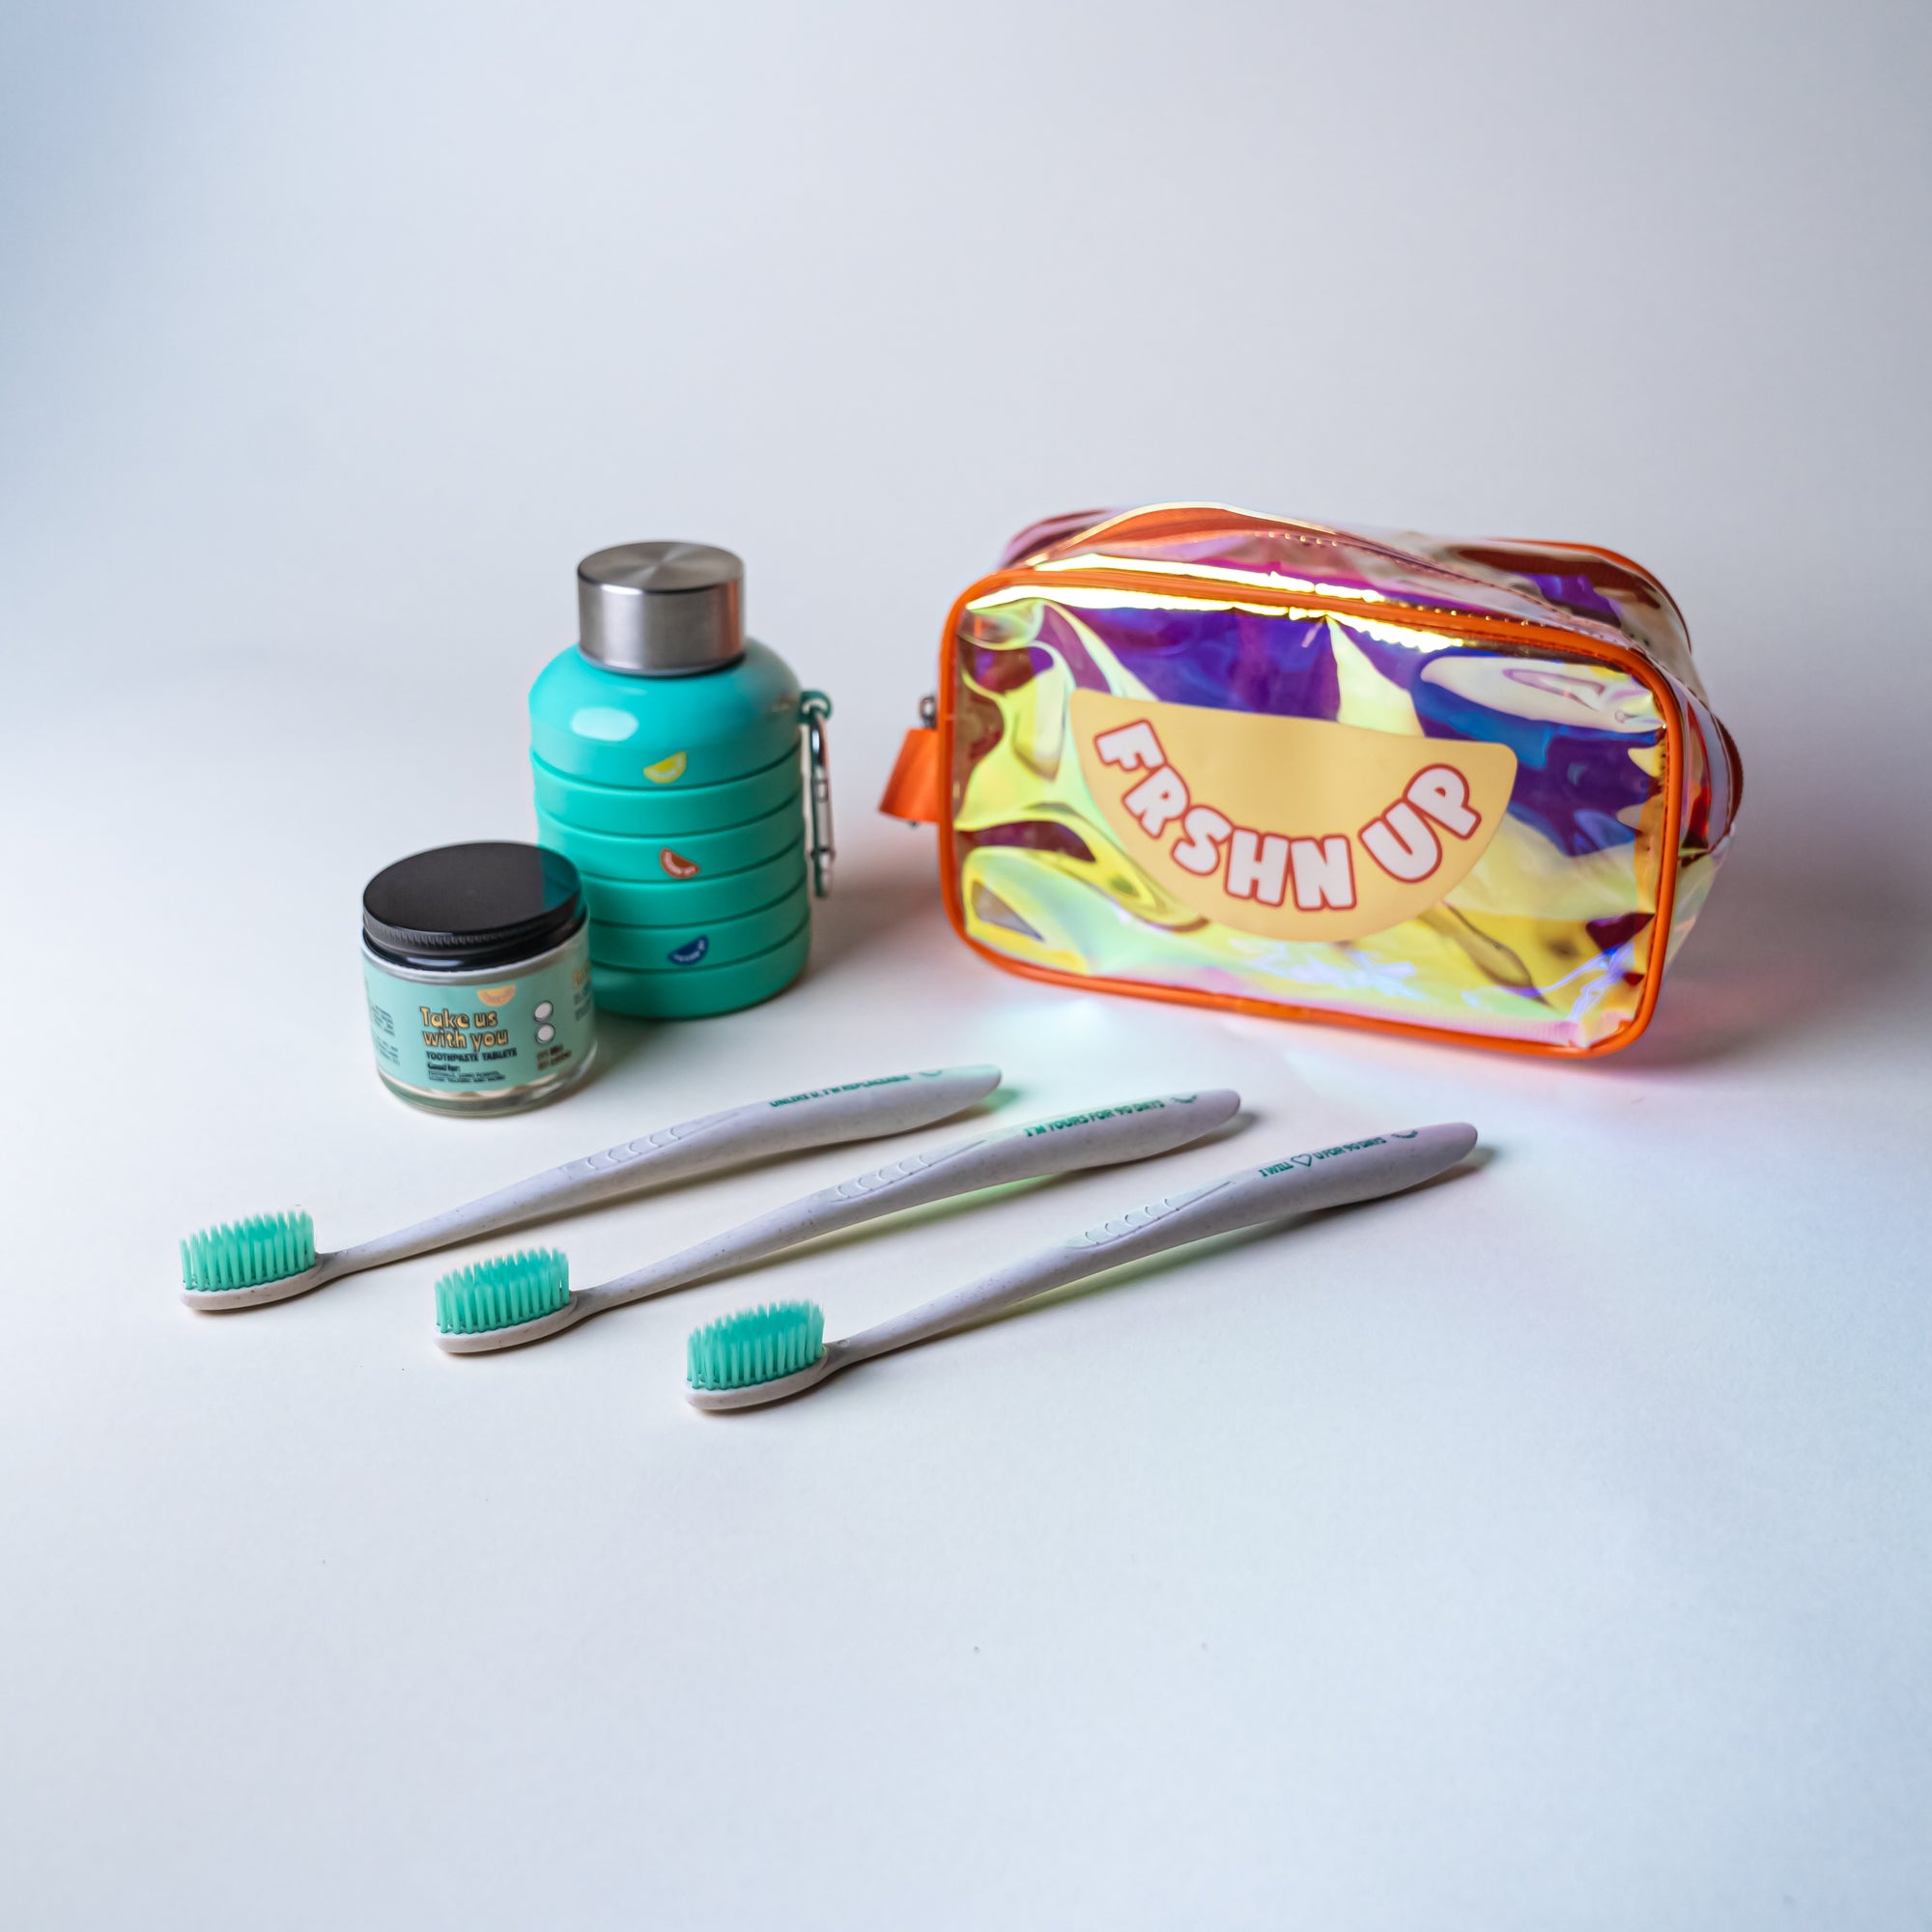 This FRSHN UP festival kit includes a set of toothbrushes, toothpaste, and a bag for all your oral care needs.